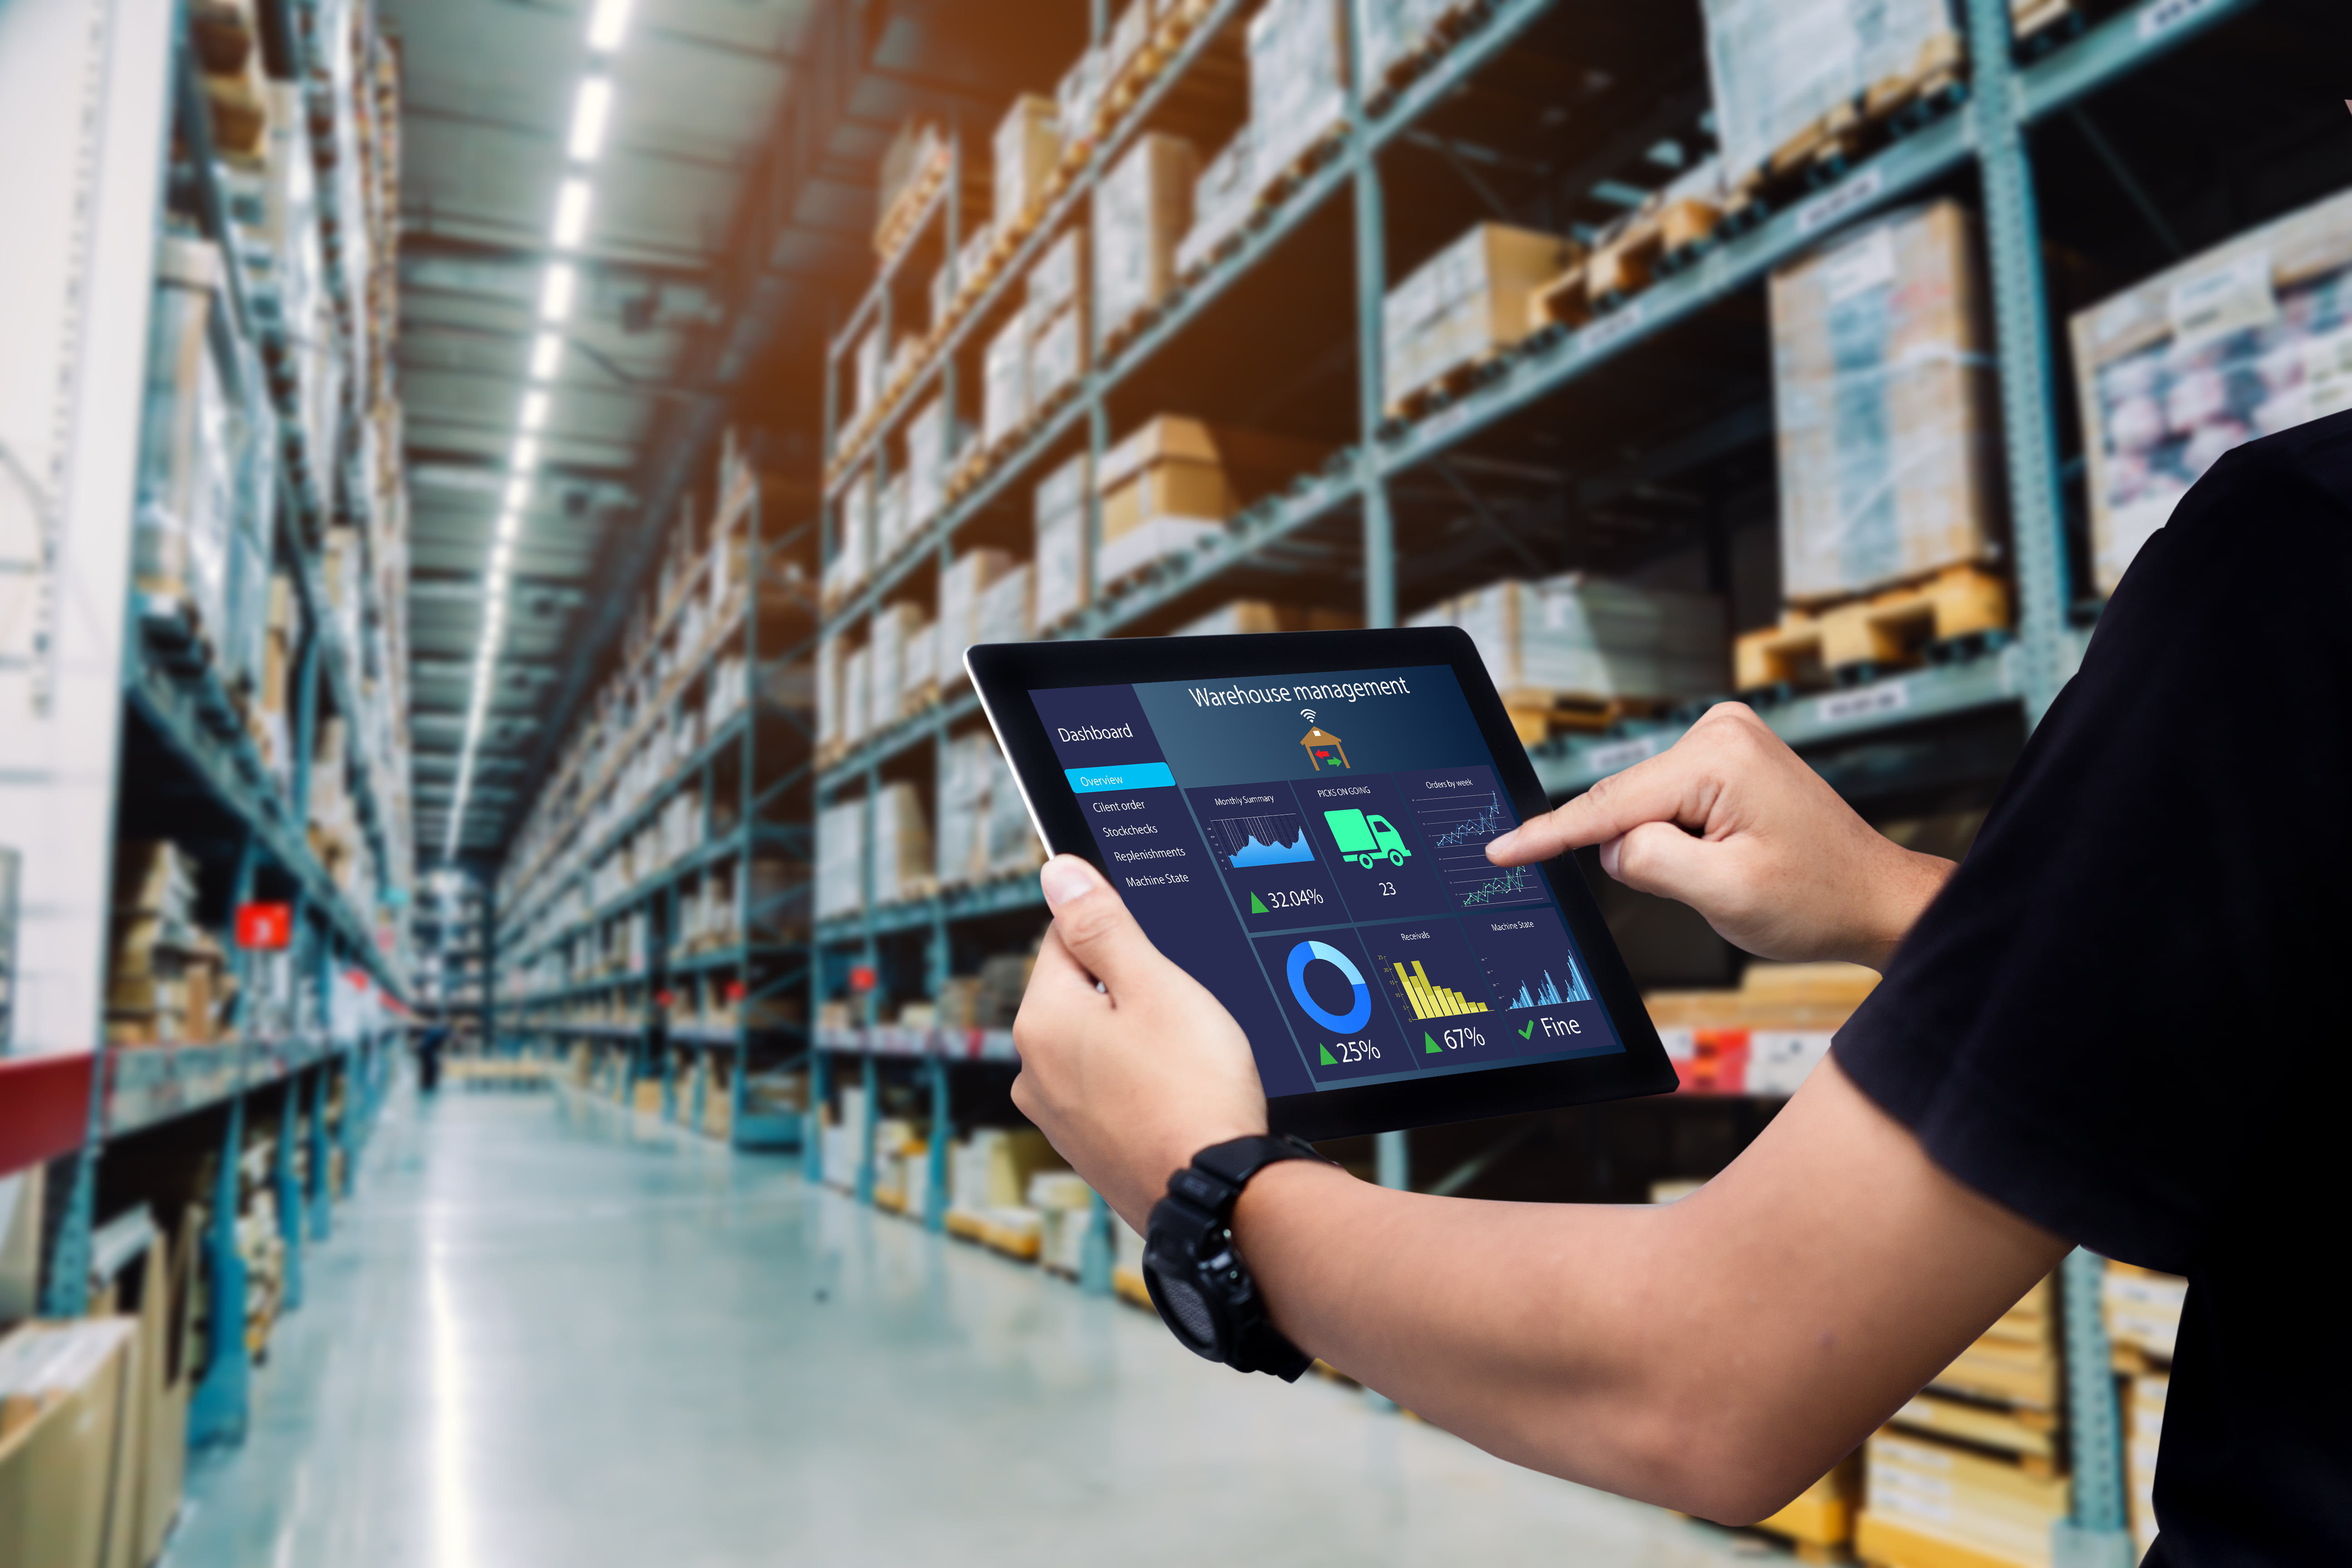 Warehouse worker looking at iPad screen that says 